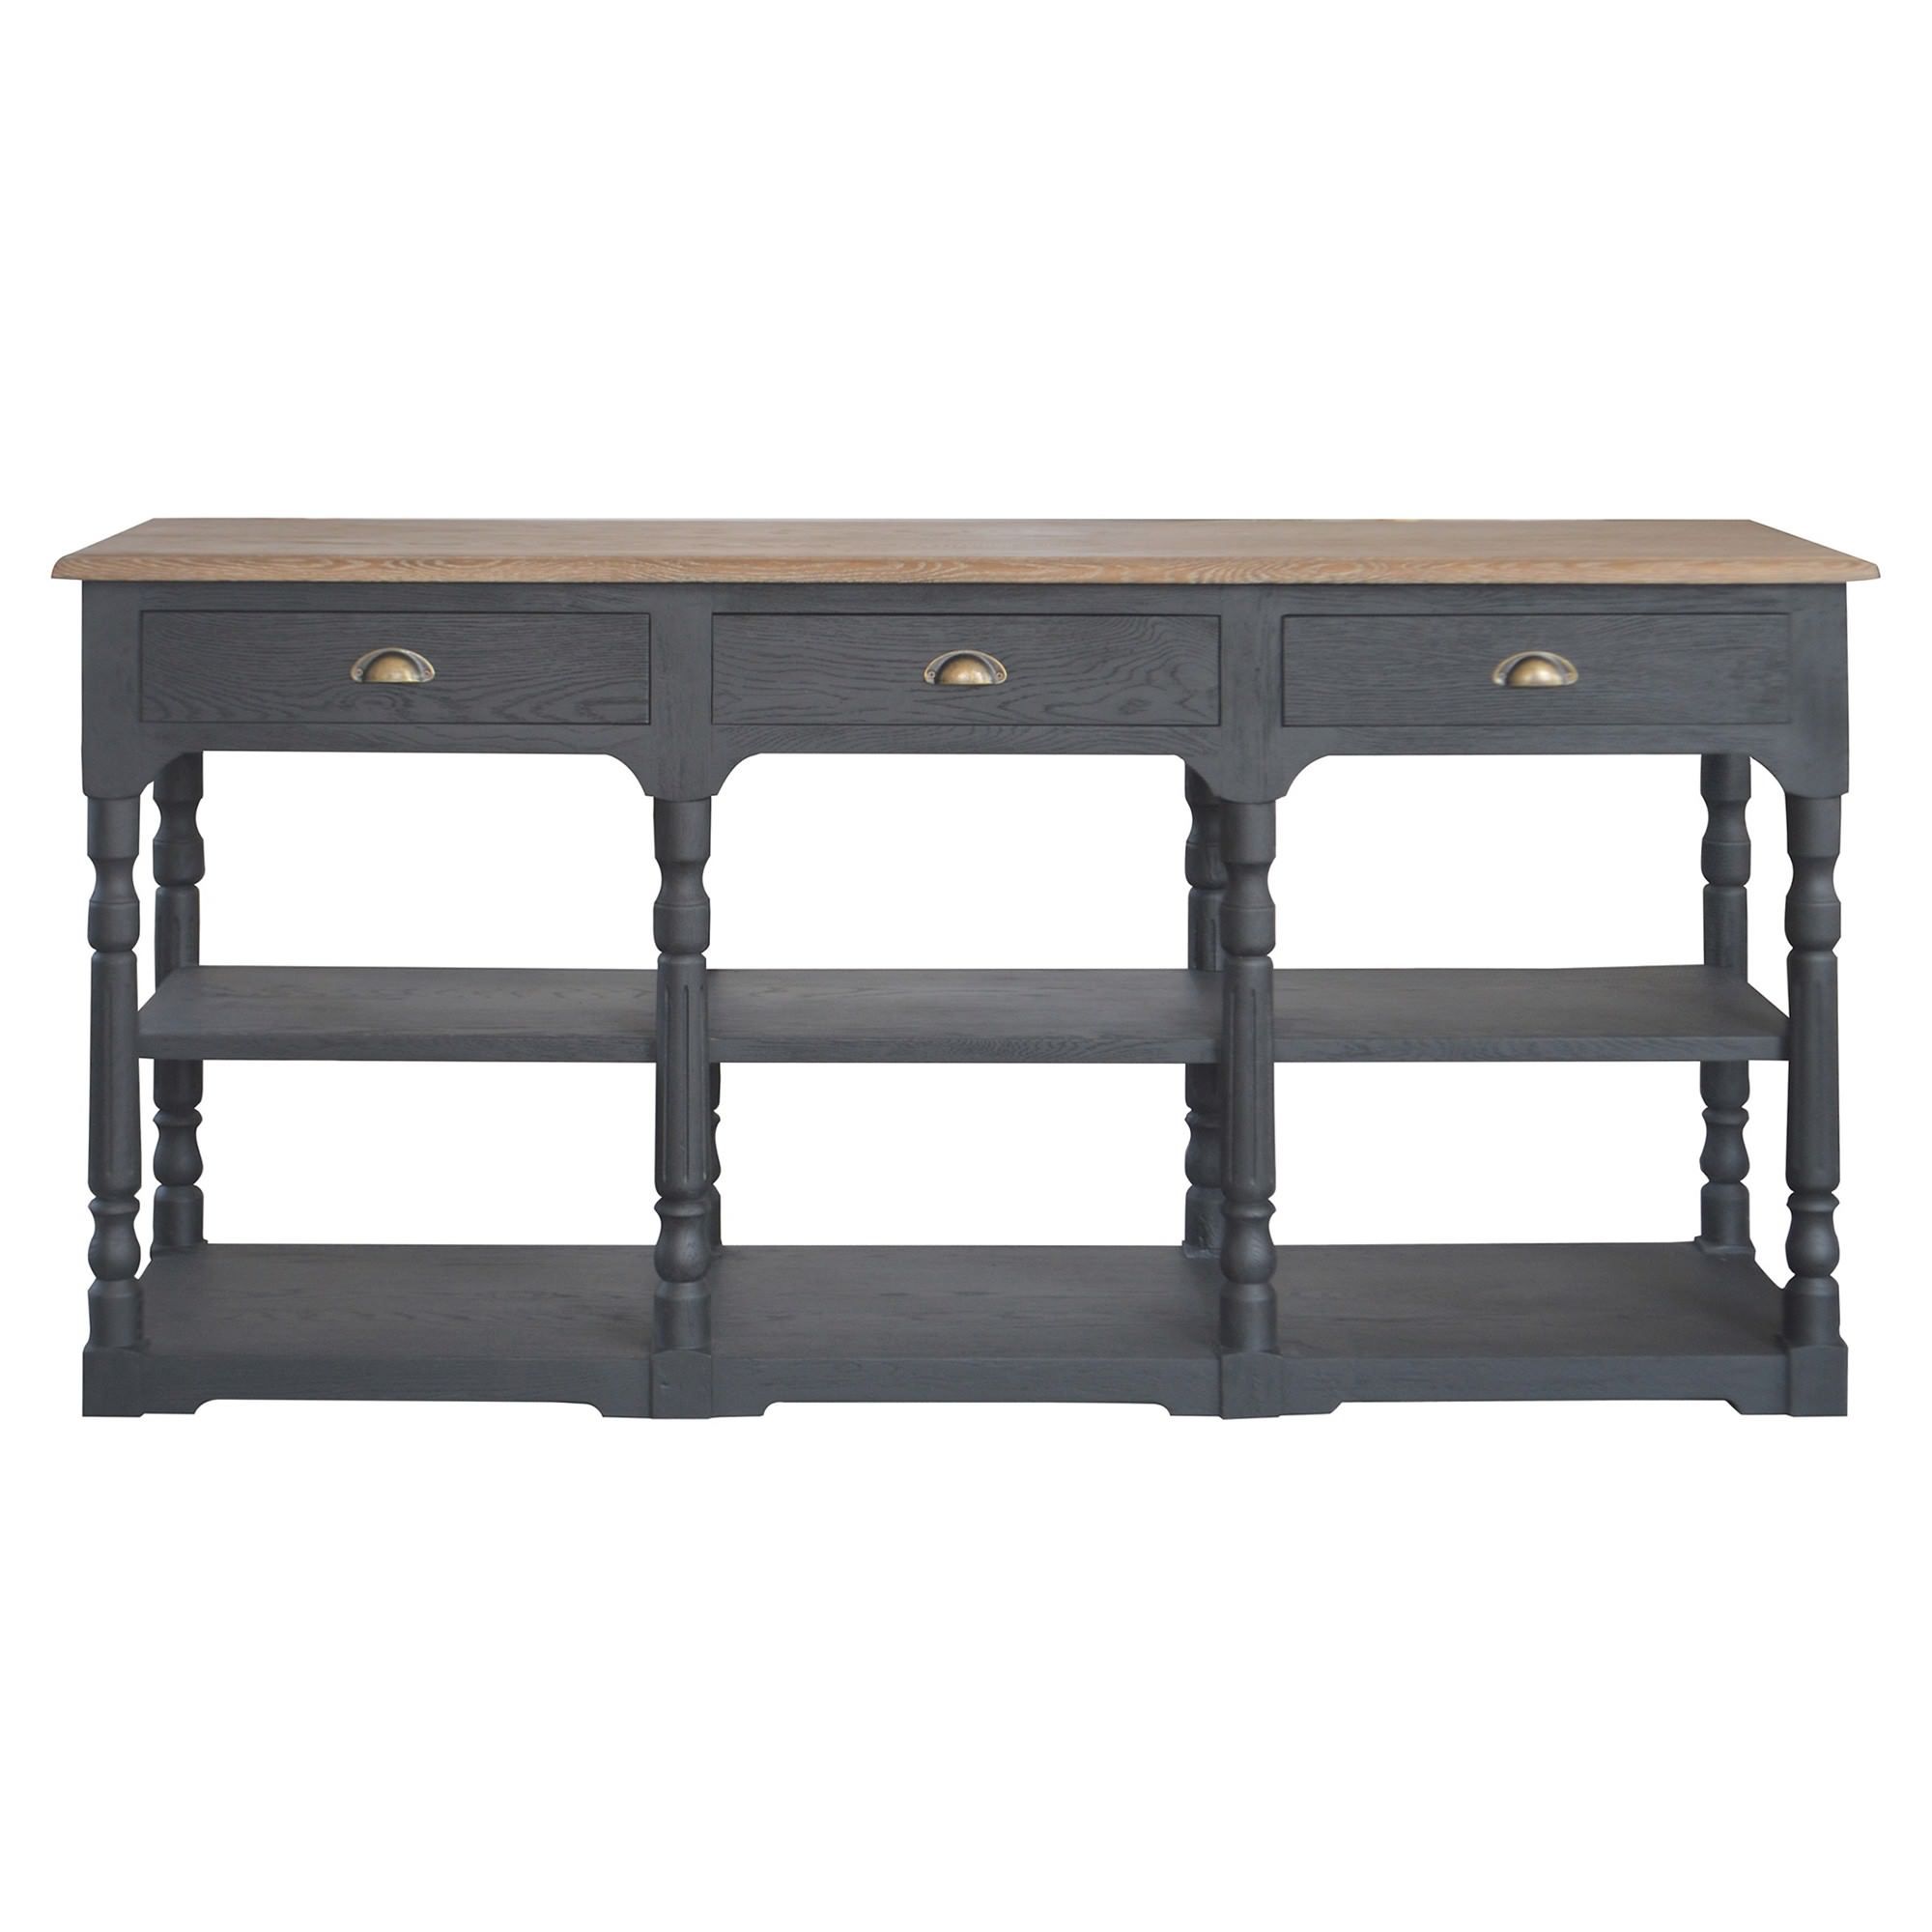 Oscar Oak Timber Console Table, 180cm, Weathered Oak / Black Oak Pertaining To Black And Oak Brown Console Tables (View 15 of 20)